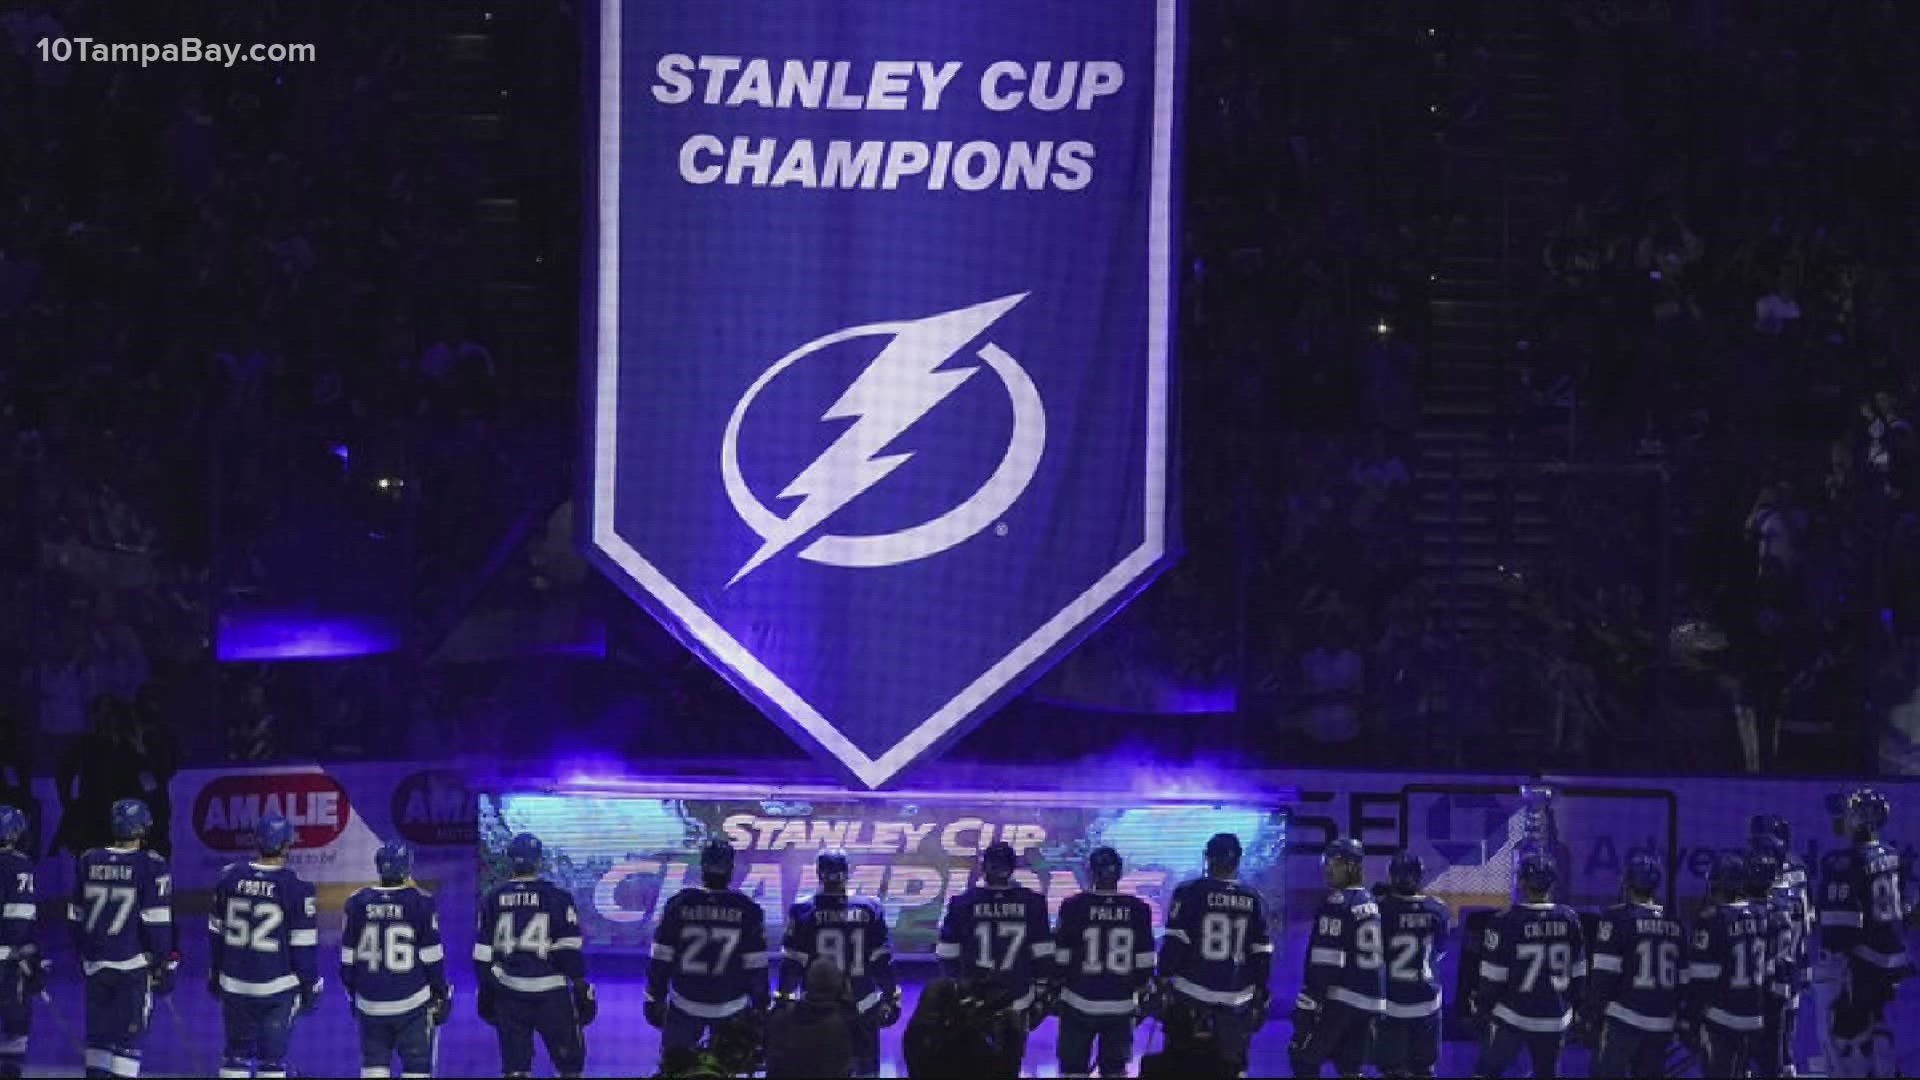 President Joe Biden will join the Lightning to celebrate the team's 2020 and 2021 championships.